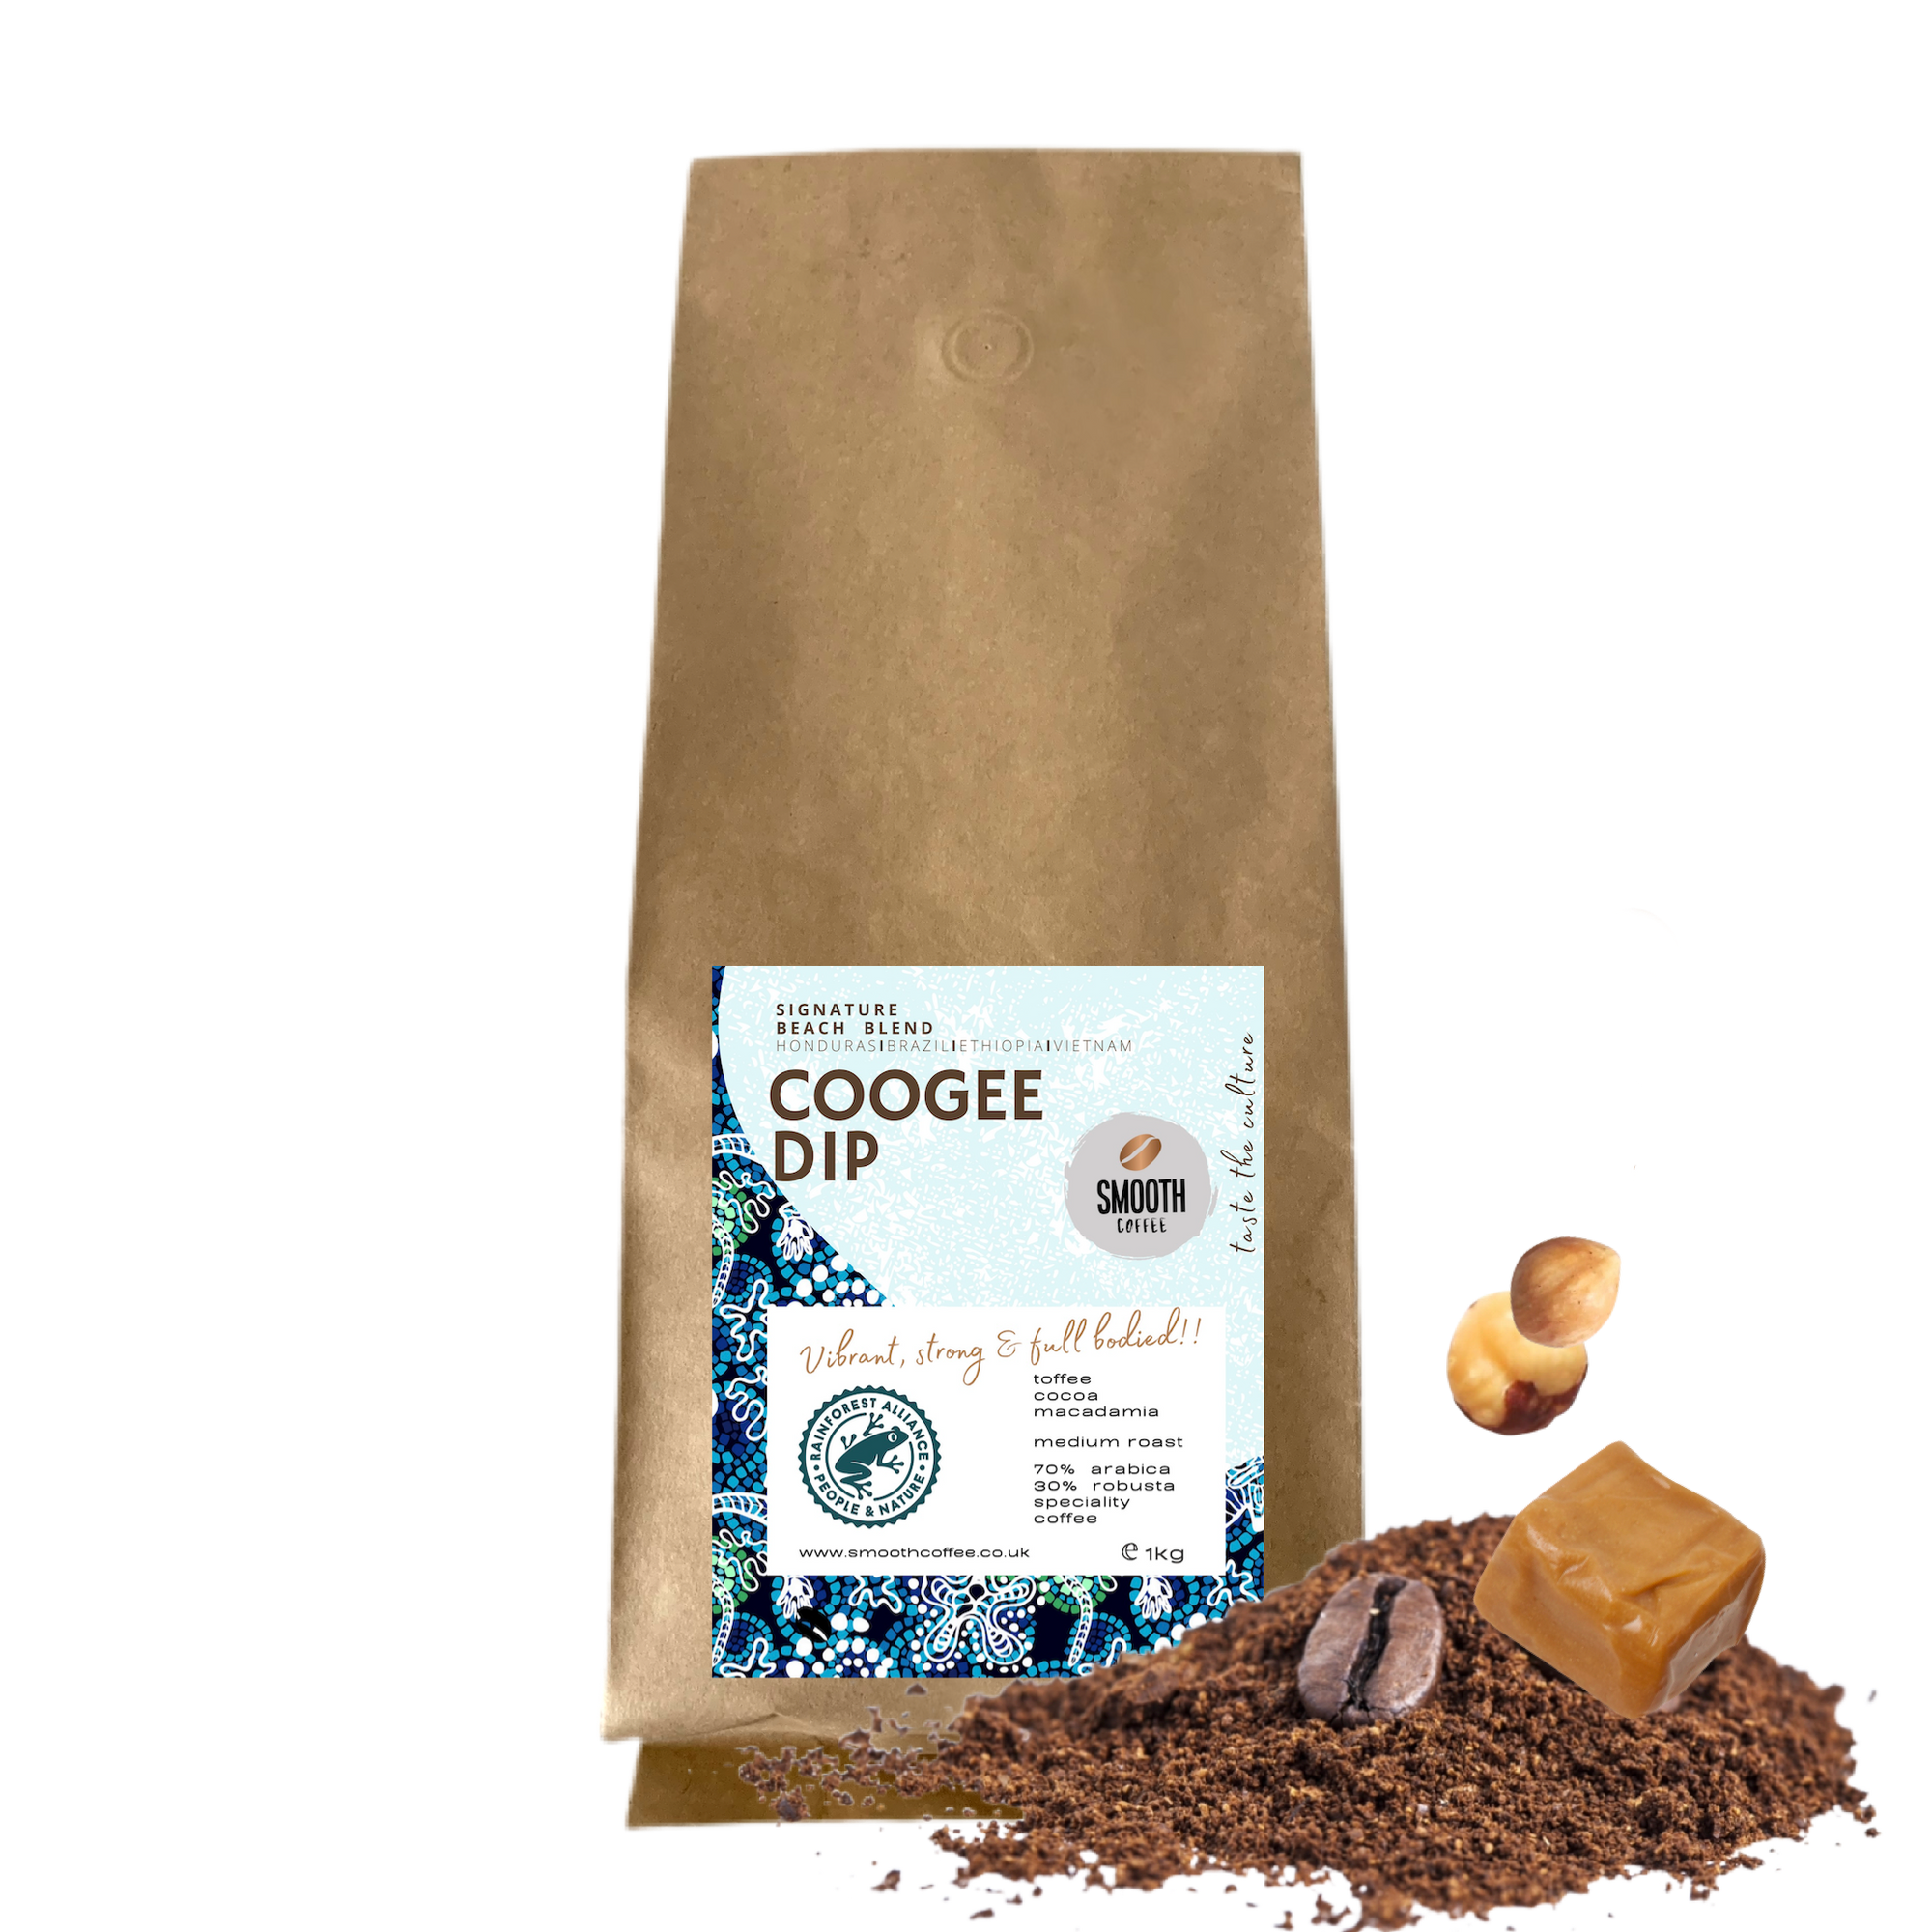 COOGEE DIP Coffee Signature Blend